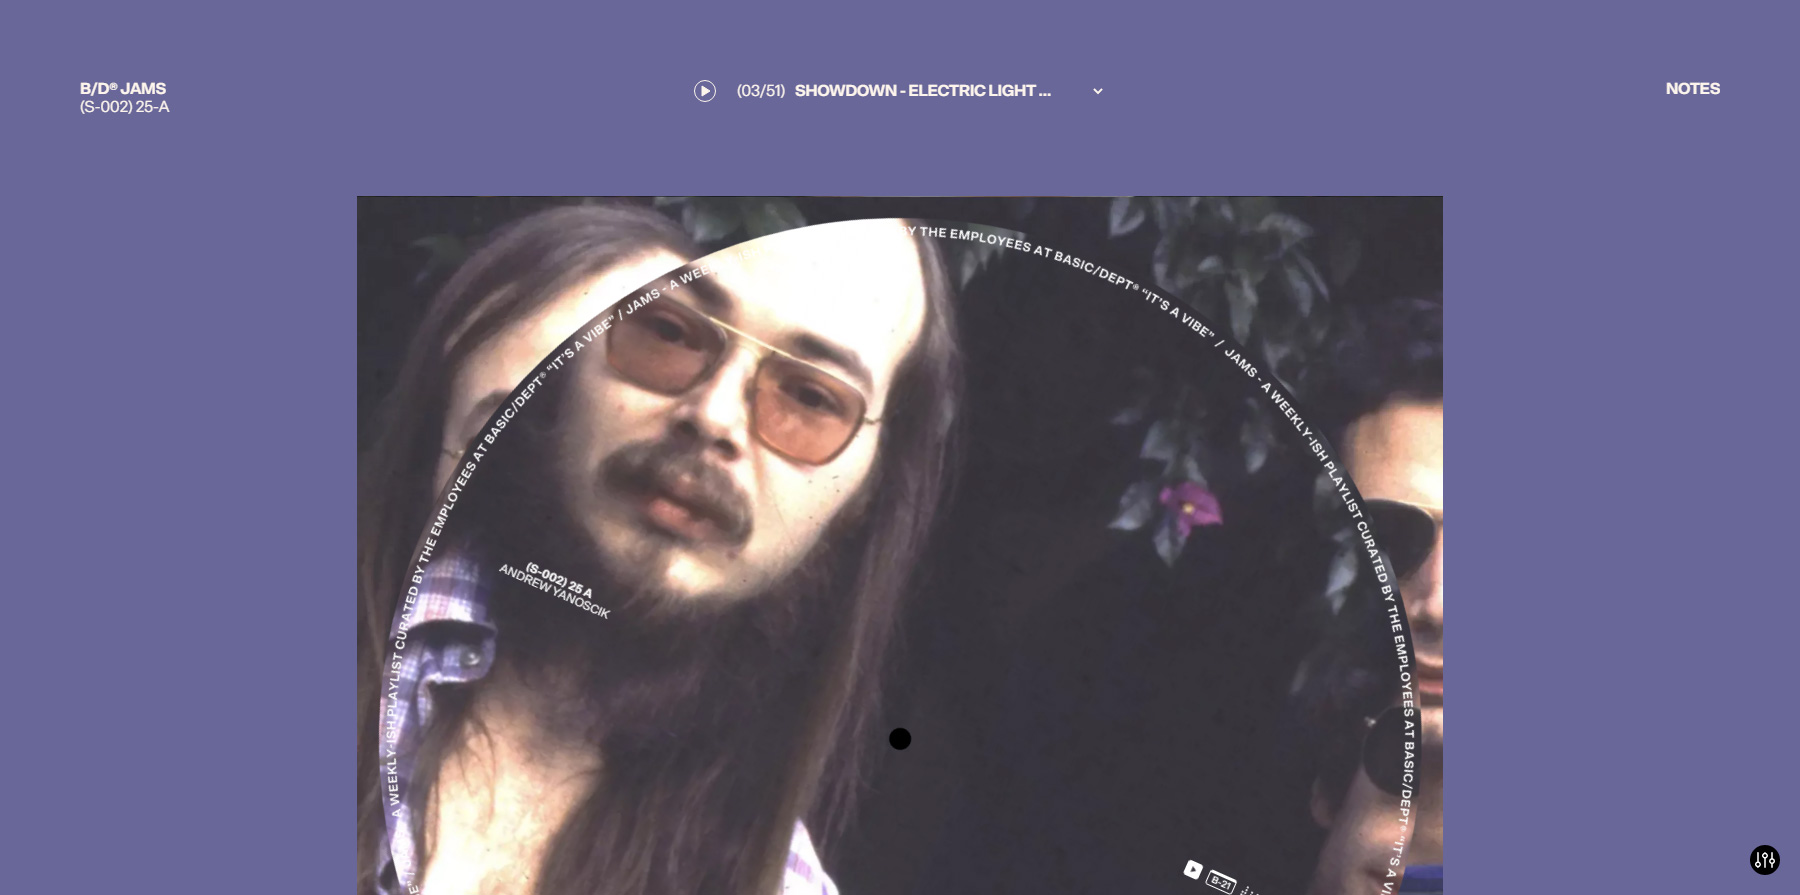 B/D® JAMS - Website of the Day